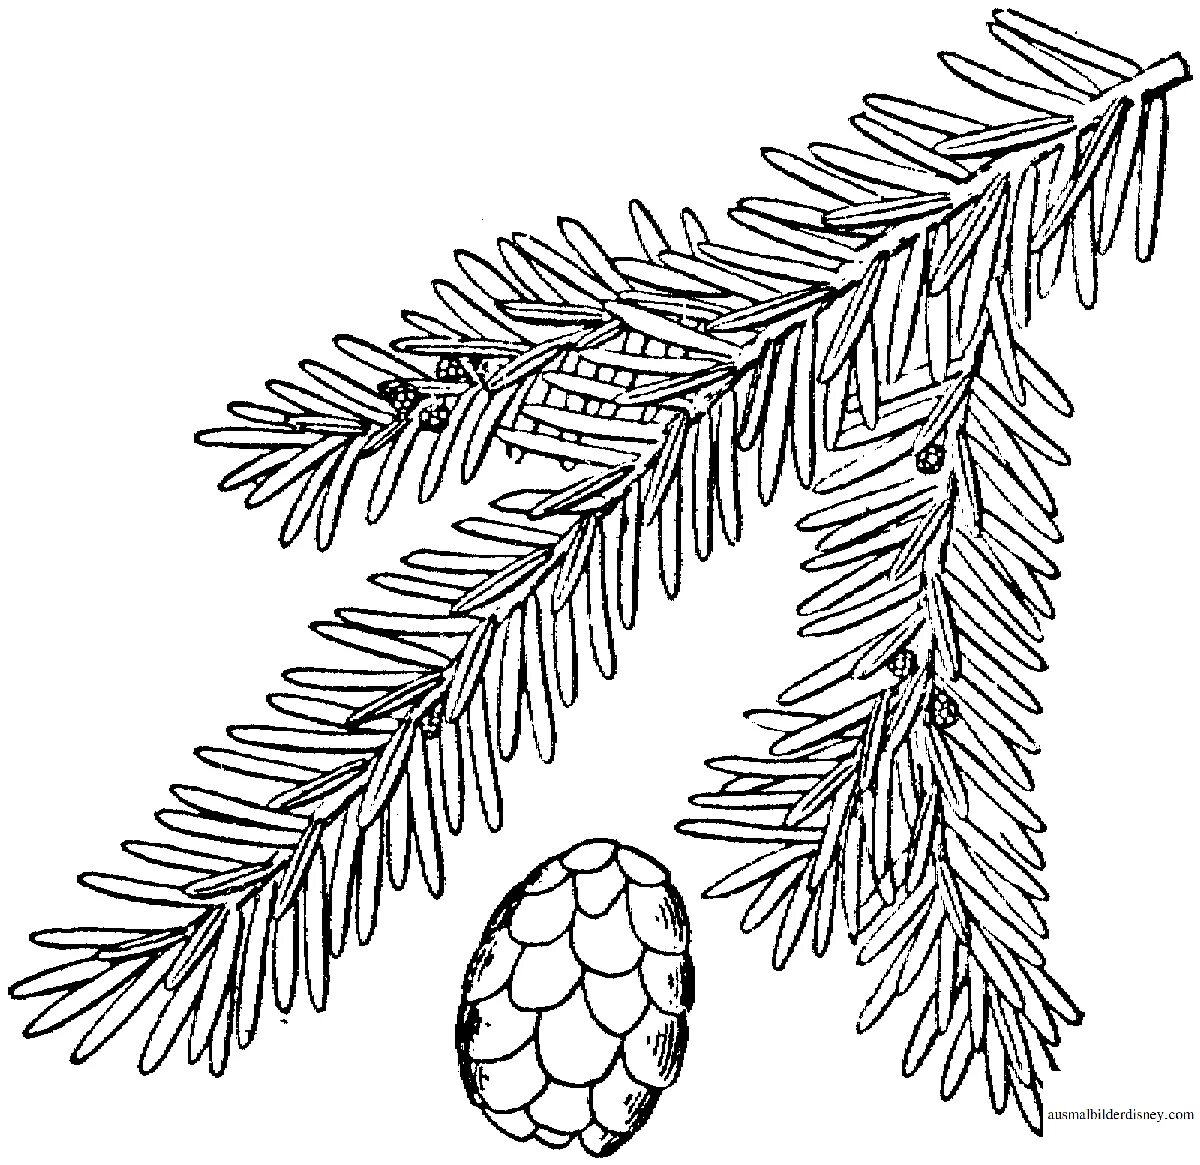 Adorable Christmas tree branch coloring book for kids